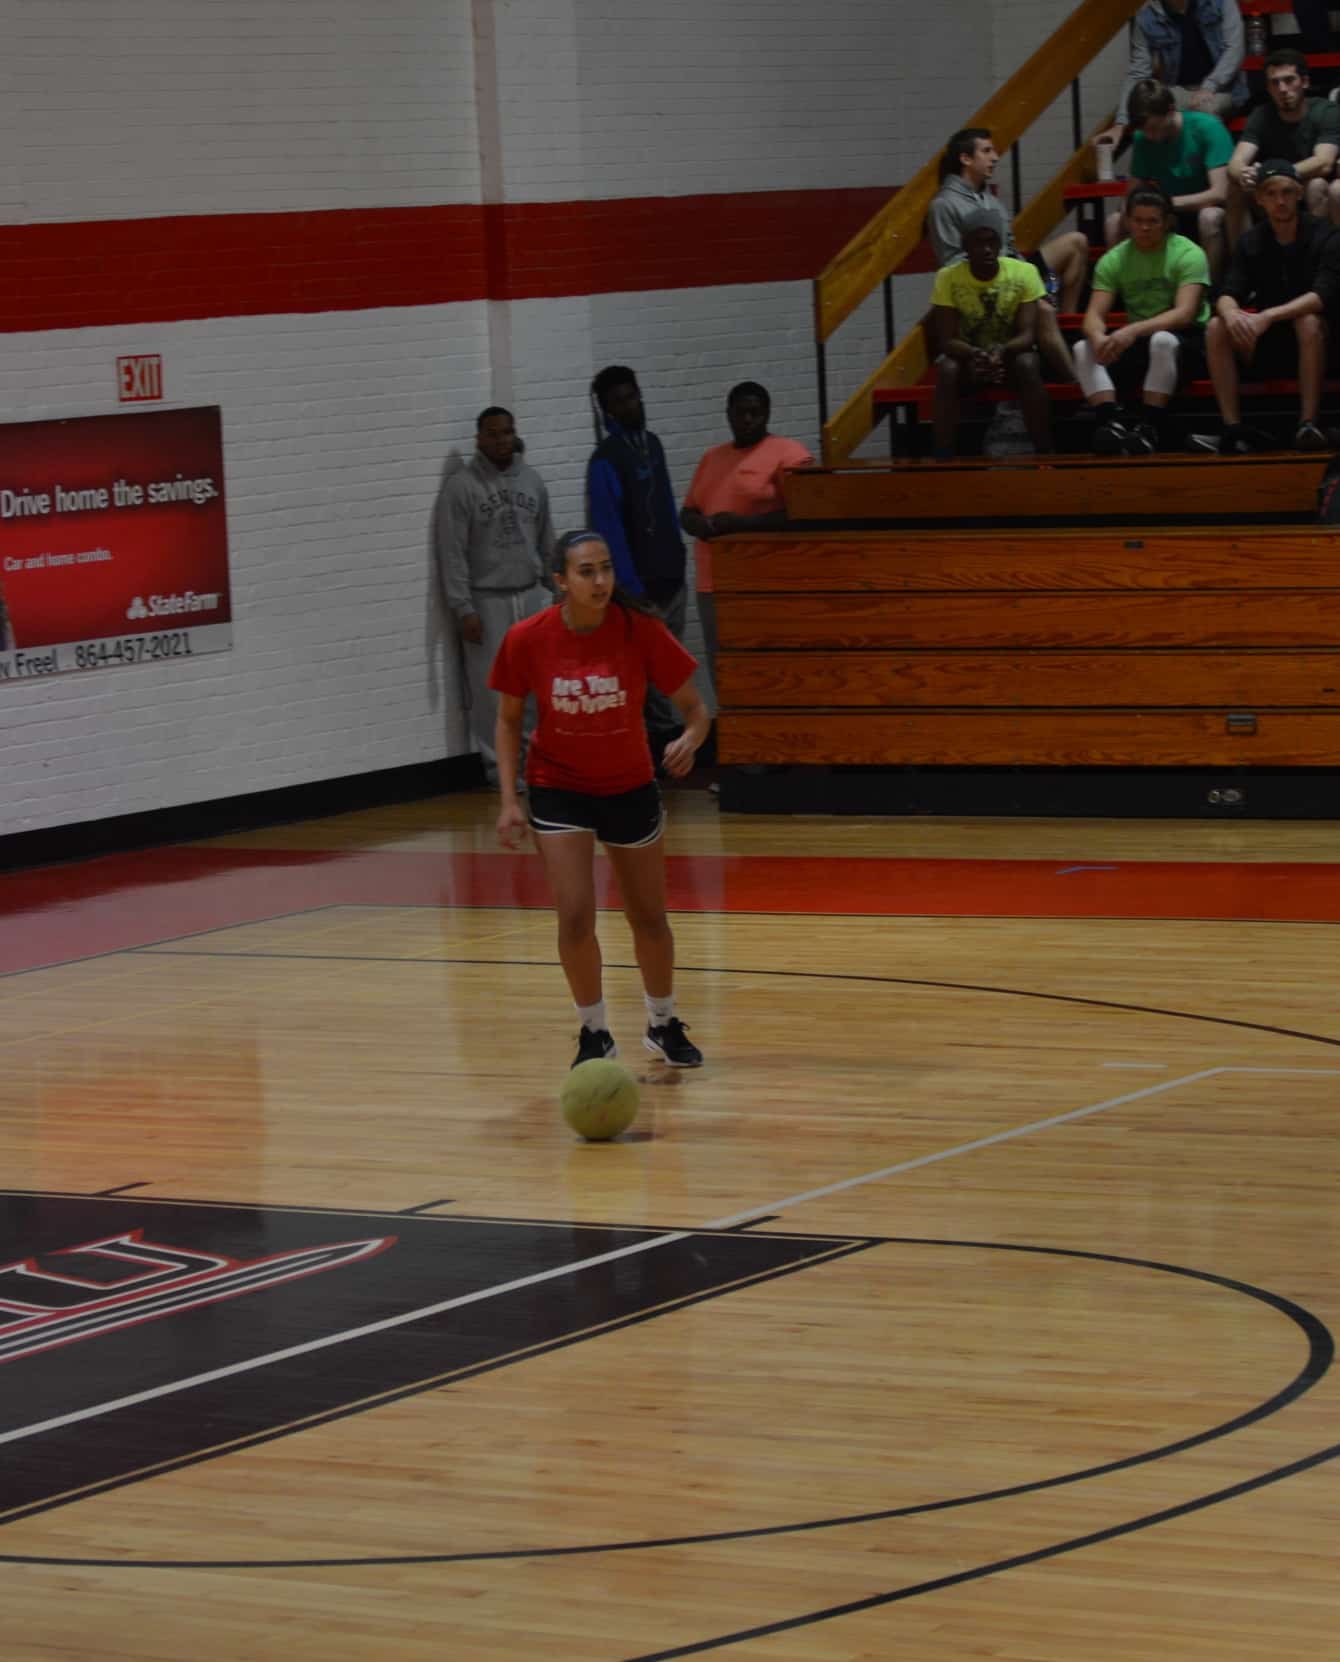 Looking to see who on her team is open,&nbsp;Sierra Singh is ready to pass the ball.